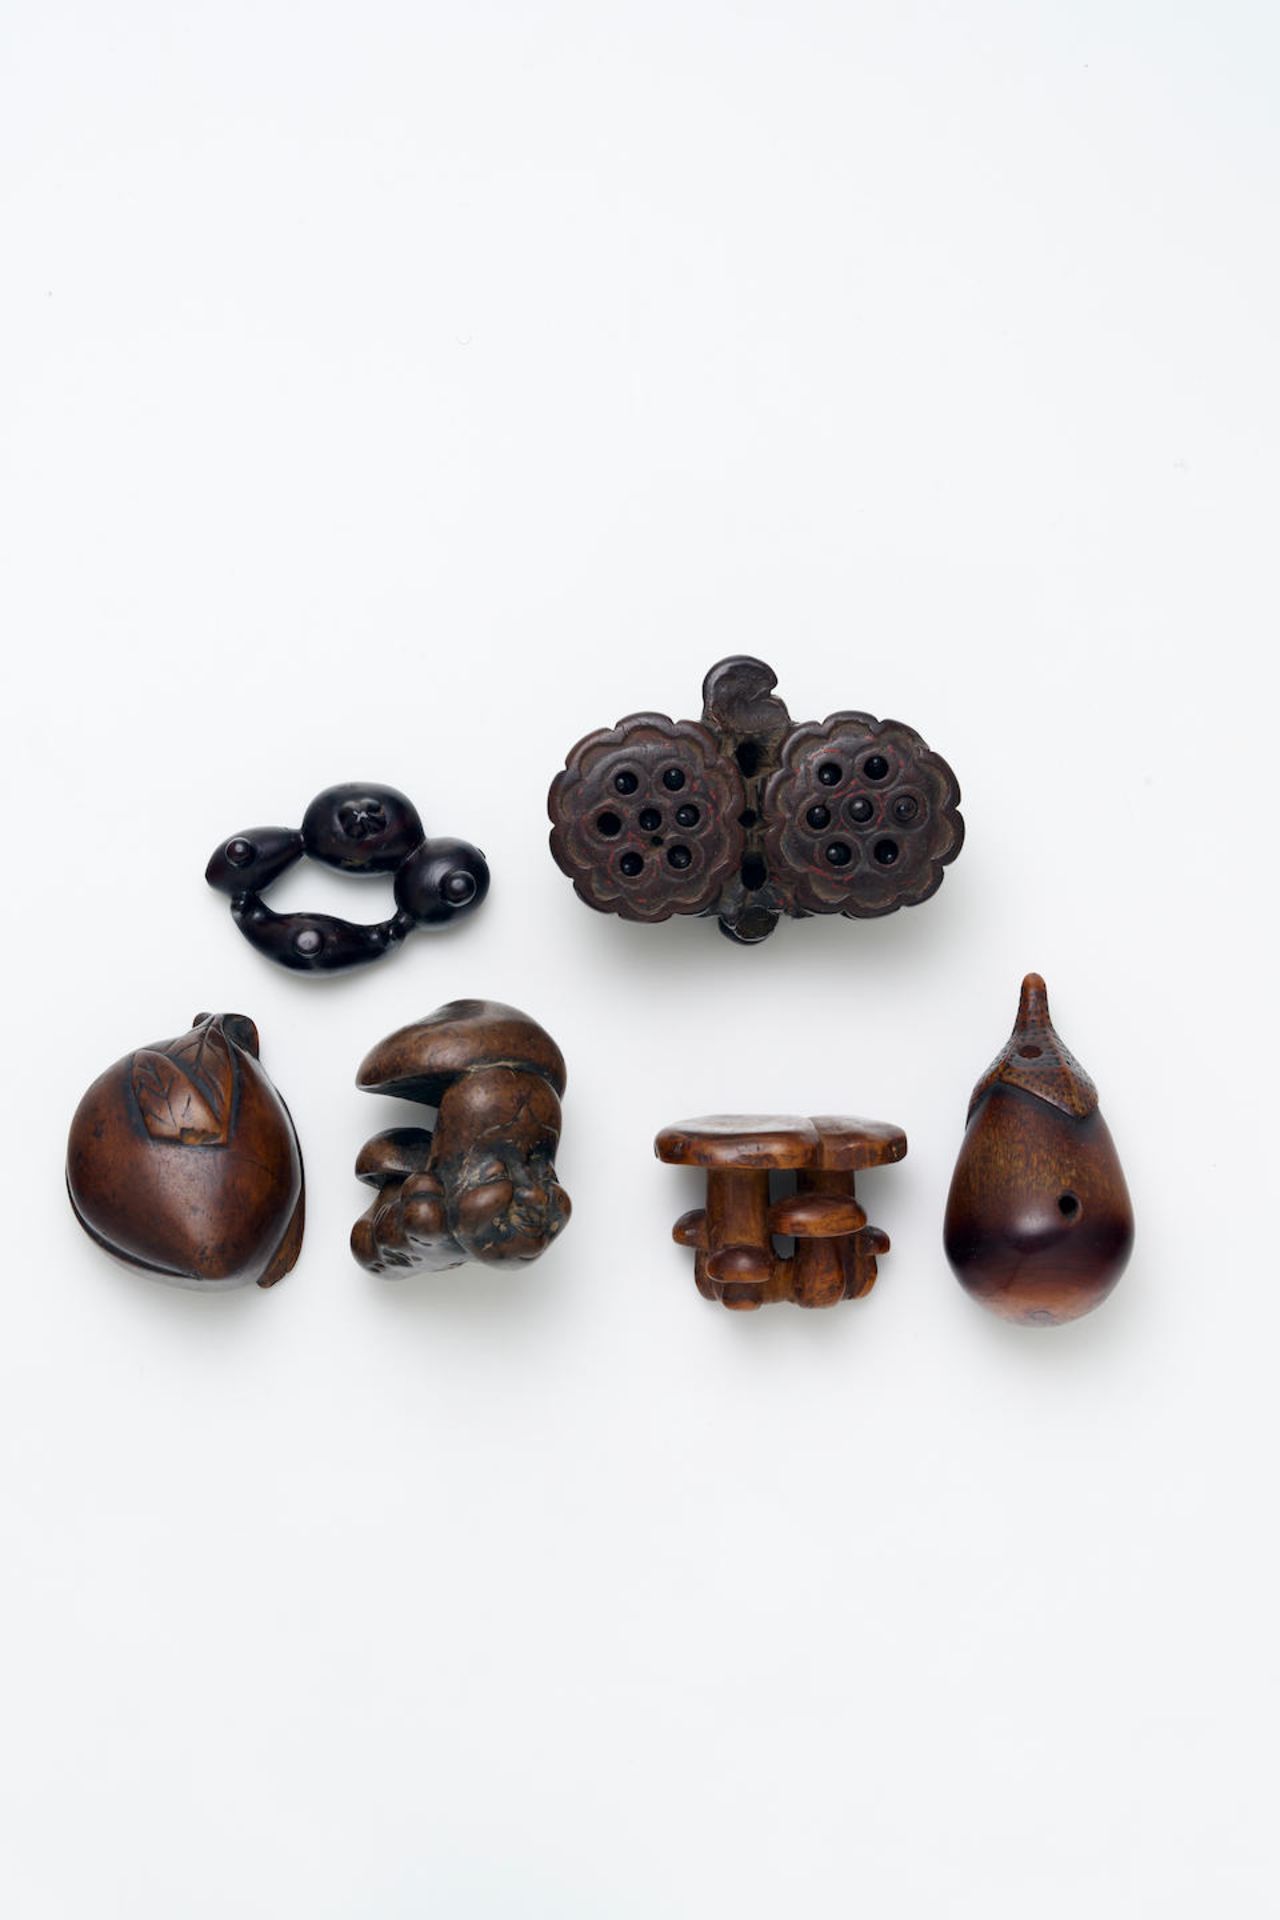 FOUR WOODEN PLANT AND FUNGUS THEME NETSUKE AND HORN AUBERGINE ROSEWOOD FRUIT AND VEGETABLE FIGUR...